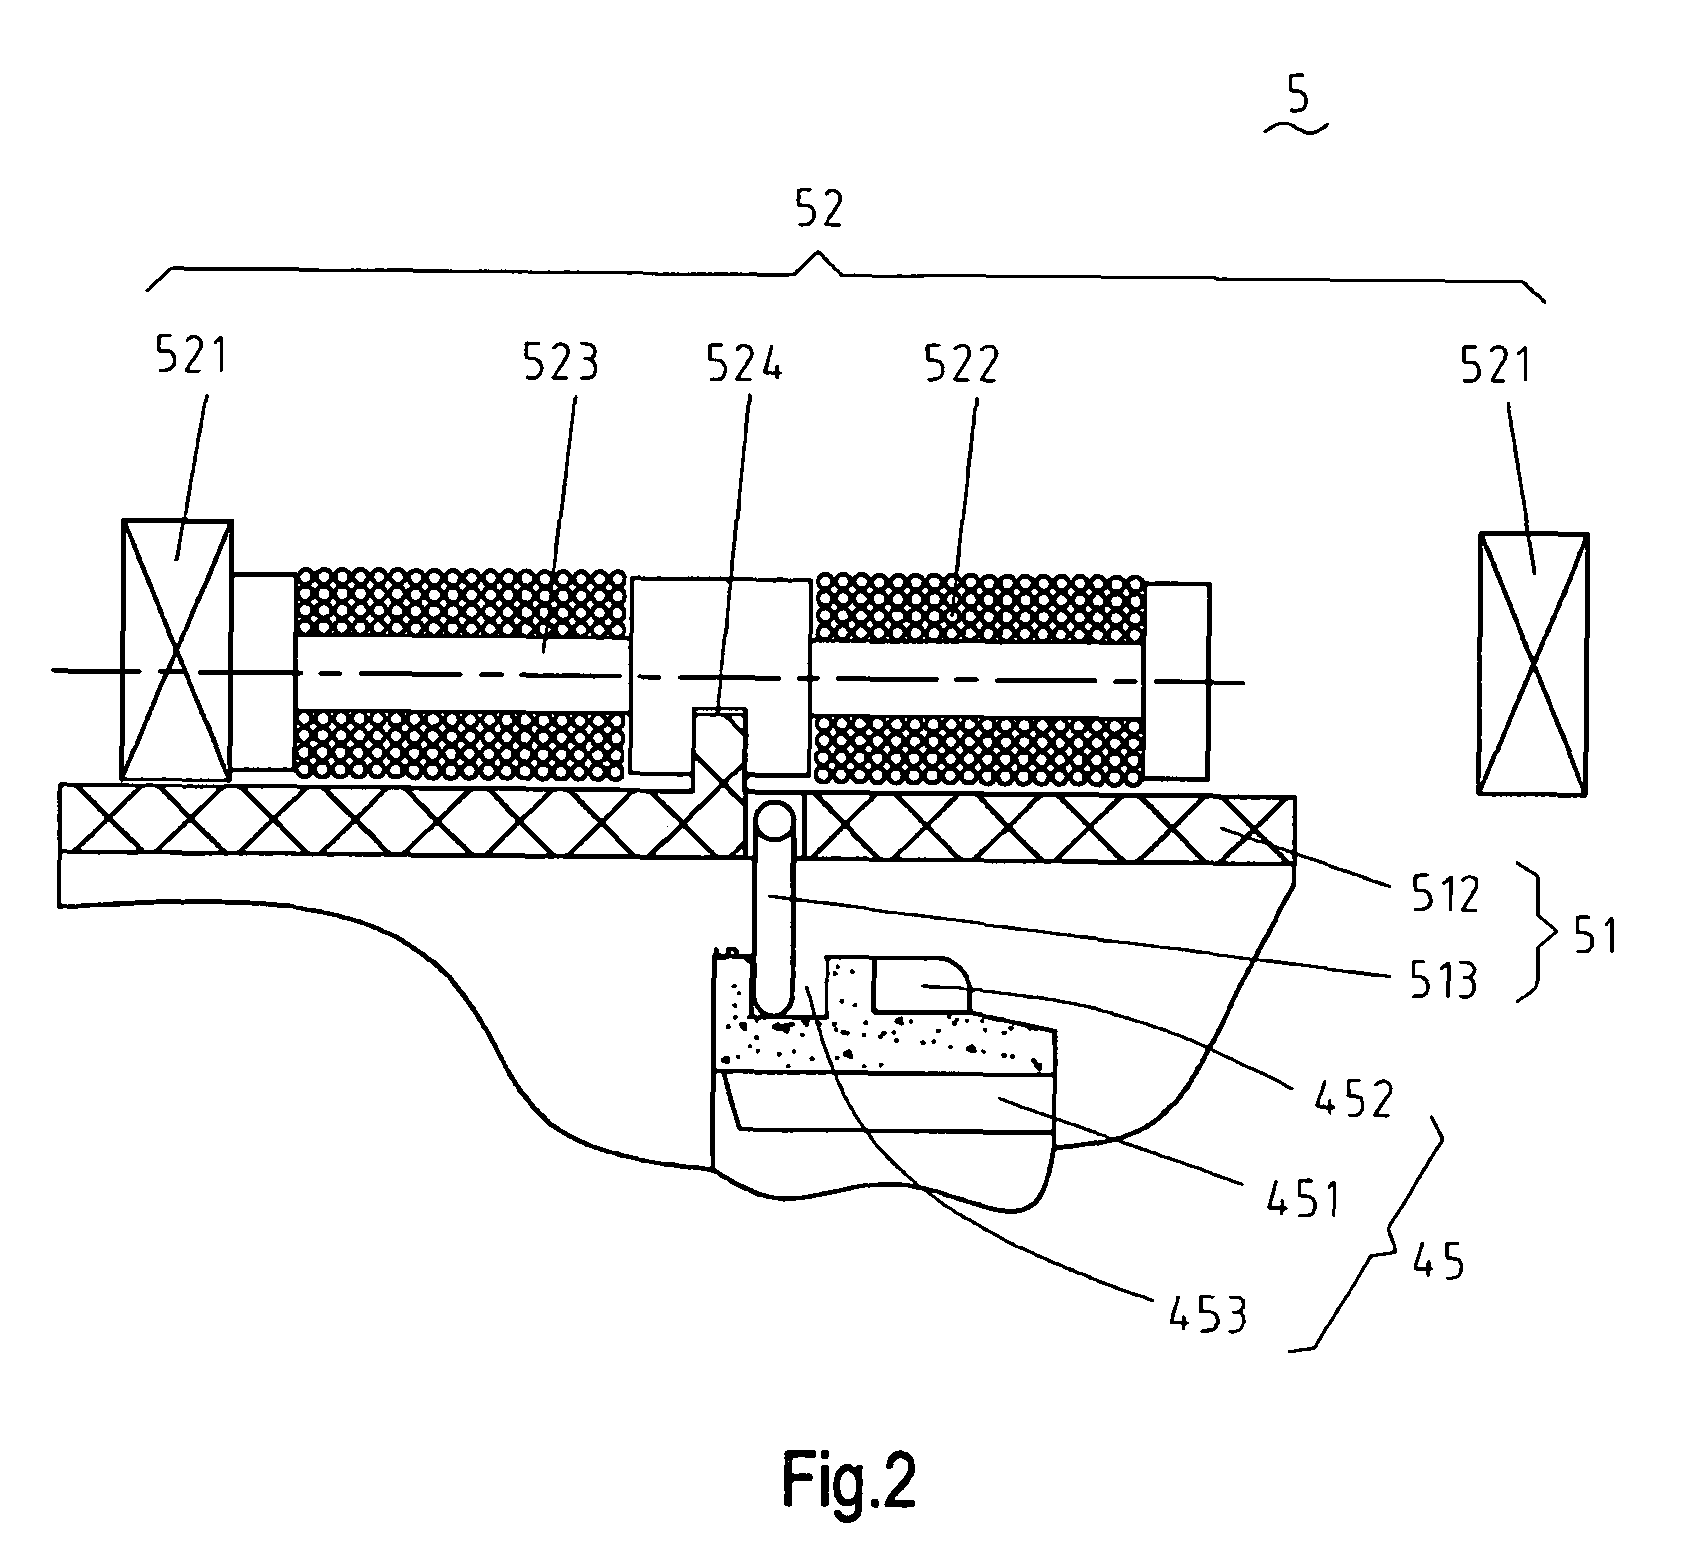 Power tool having control system for changing rotational speed of output shaft